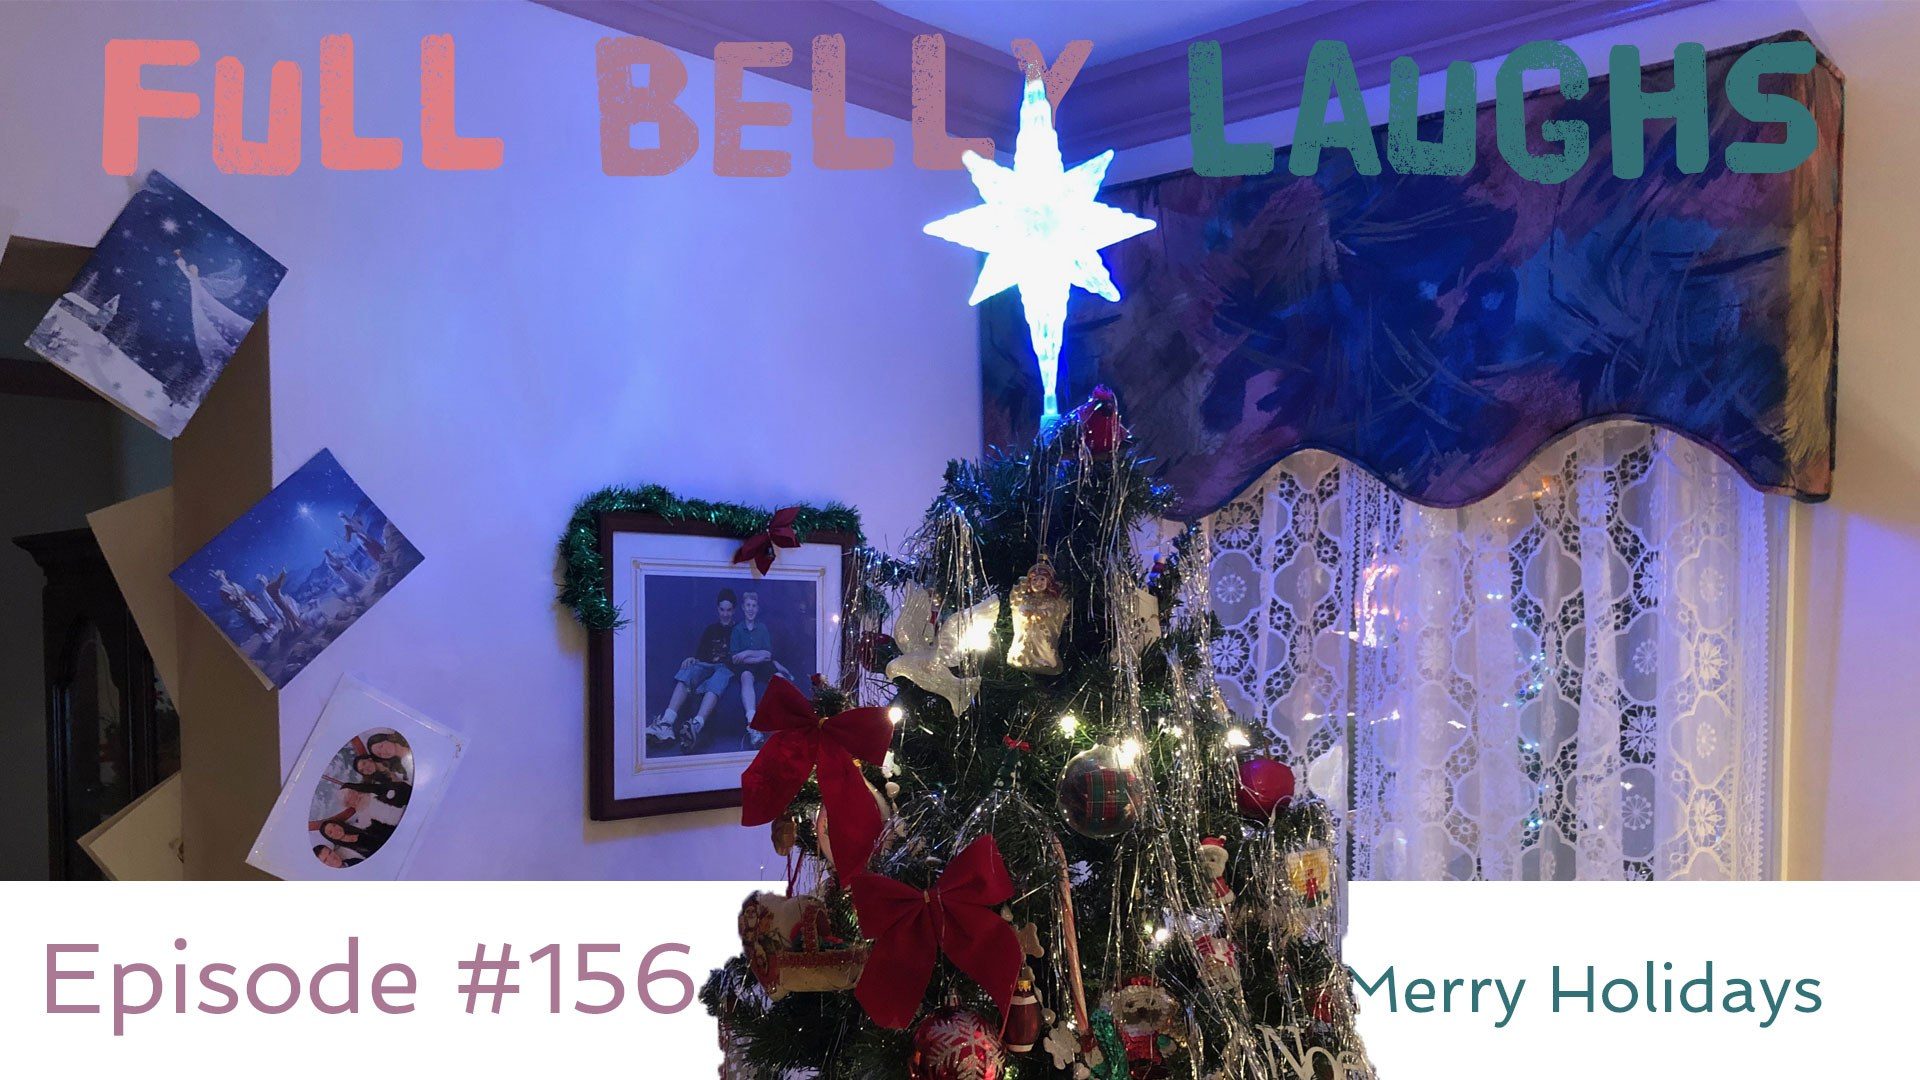 full belly laughs podcast episode 156 merry holidays christmas audio artwork